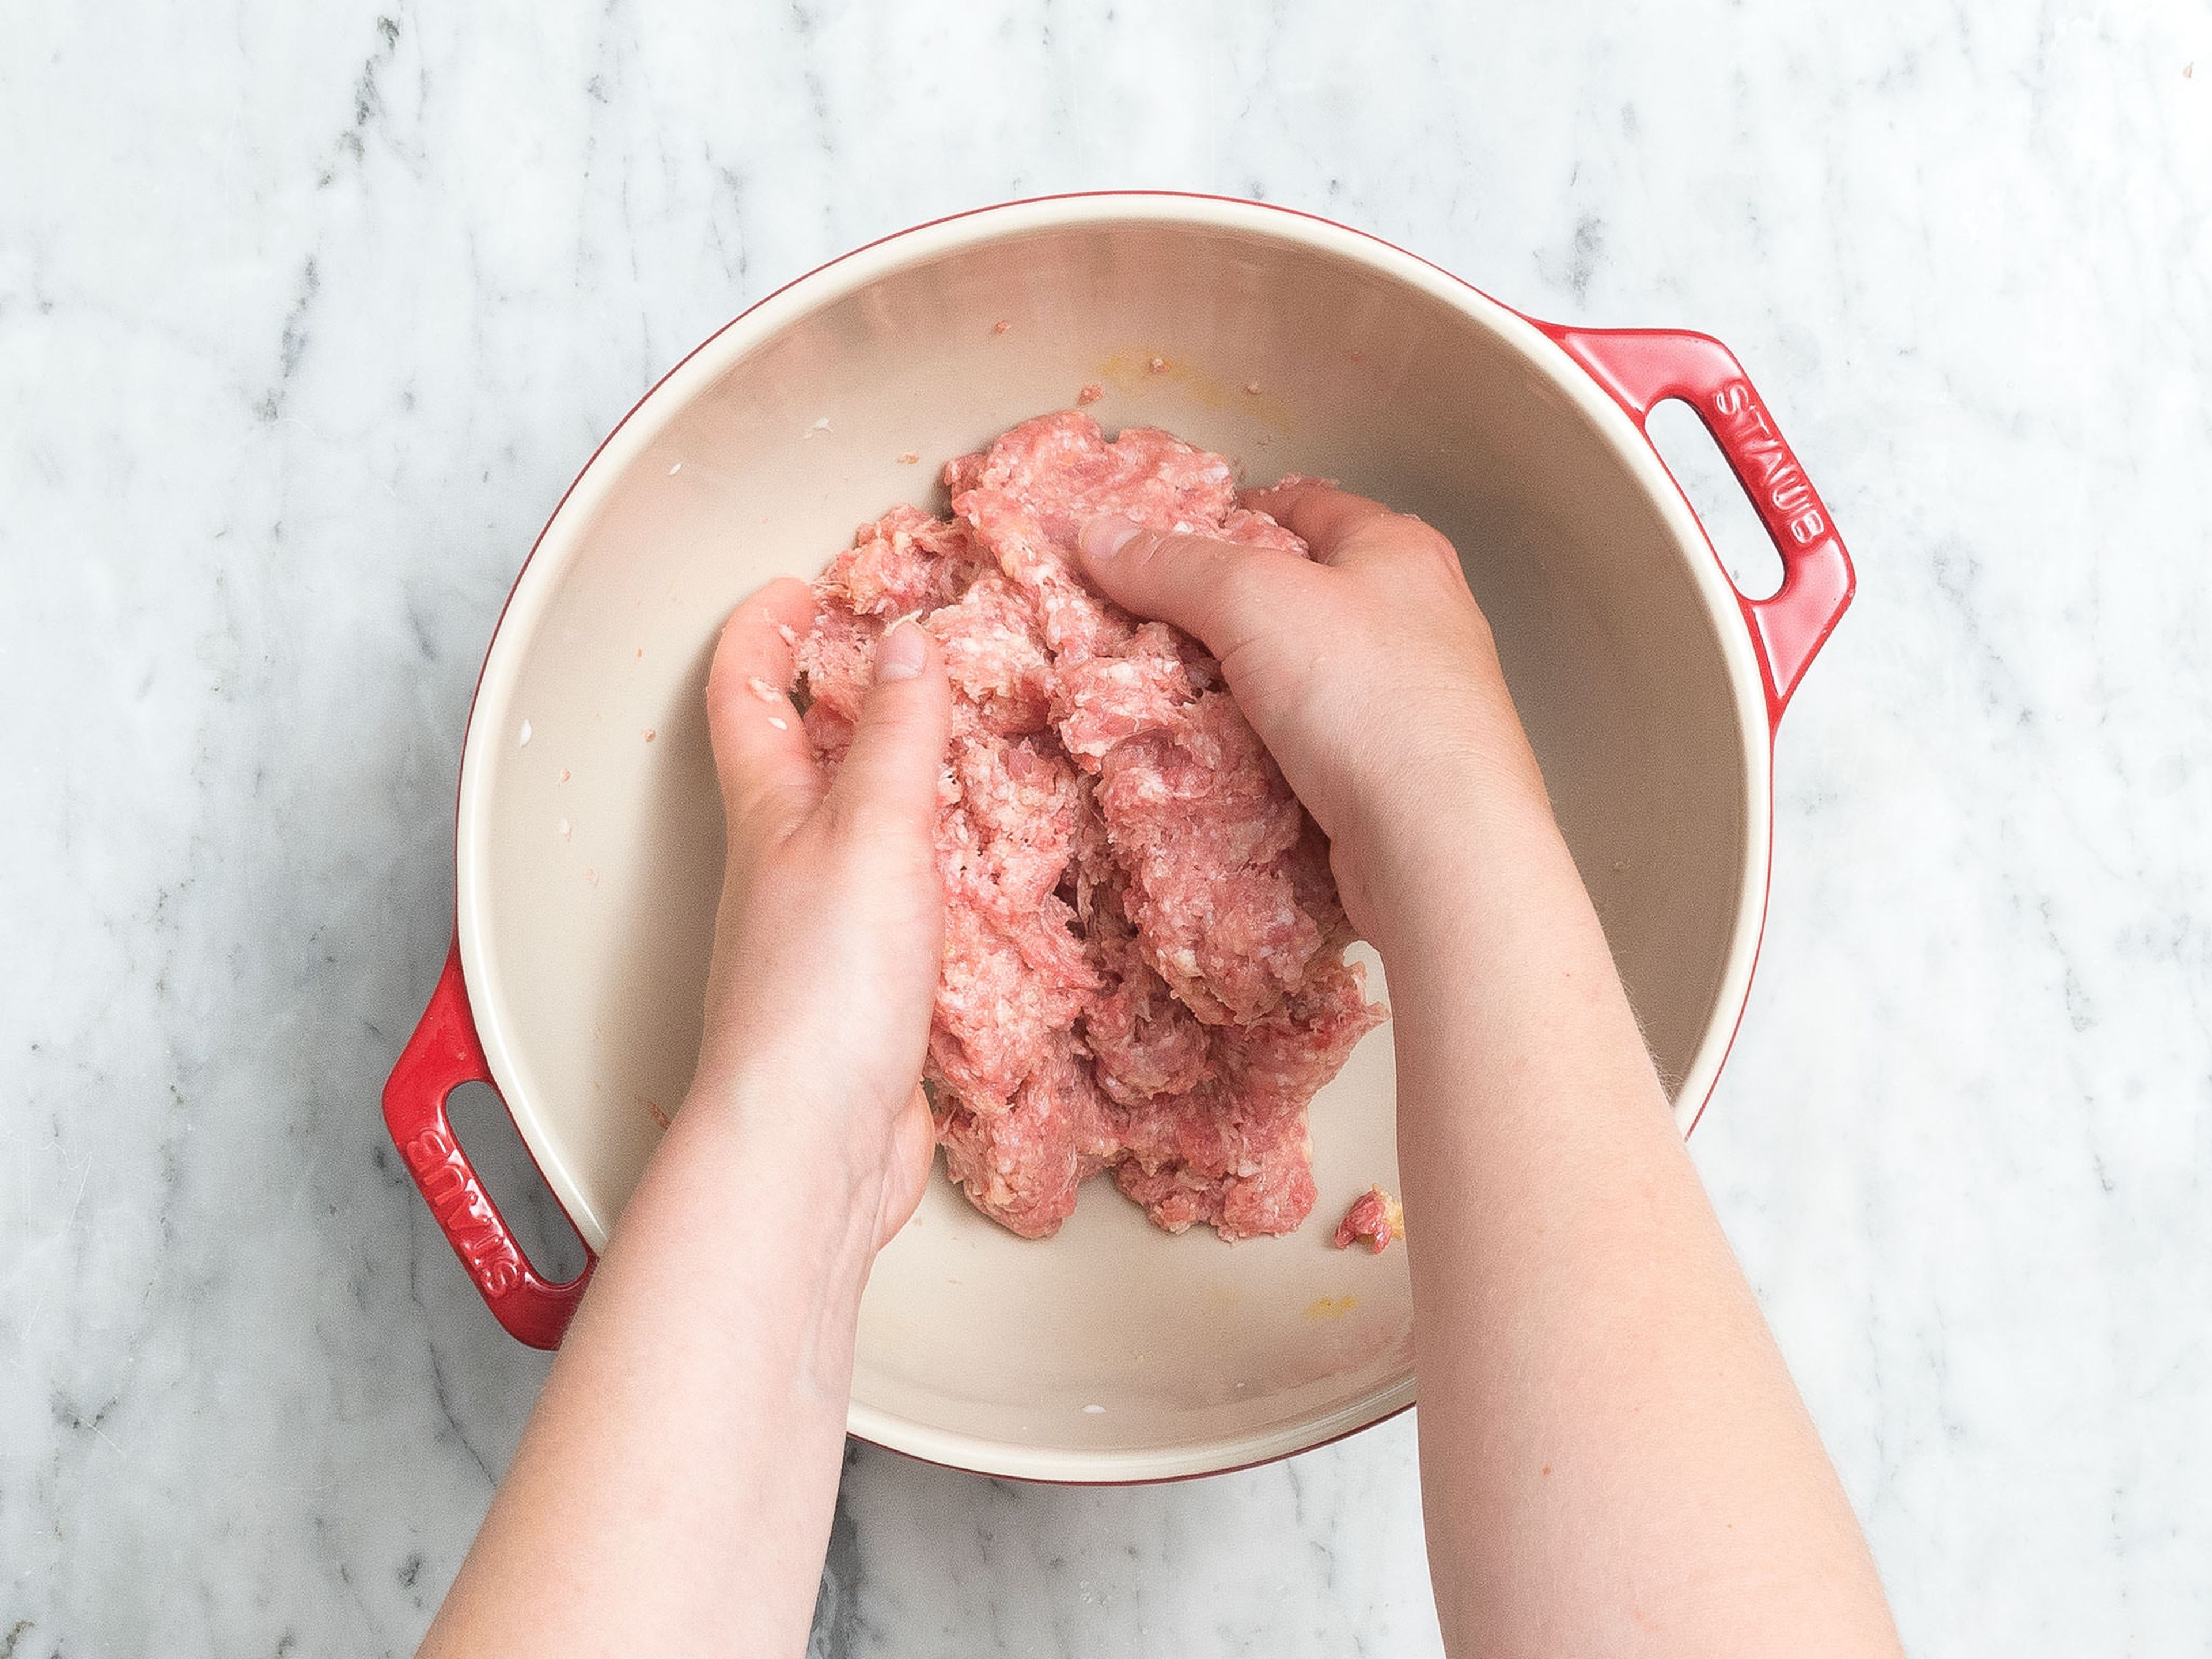 Add sandwich bread to a small bowl and let it soak in the milk. Add ground beef, ground pork, remaining egg, and soaked bread to a large bowl. Season with salt and pepper and mix with your hands to combine.